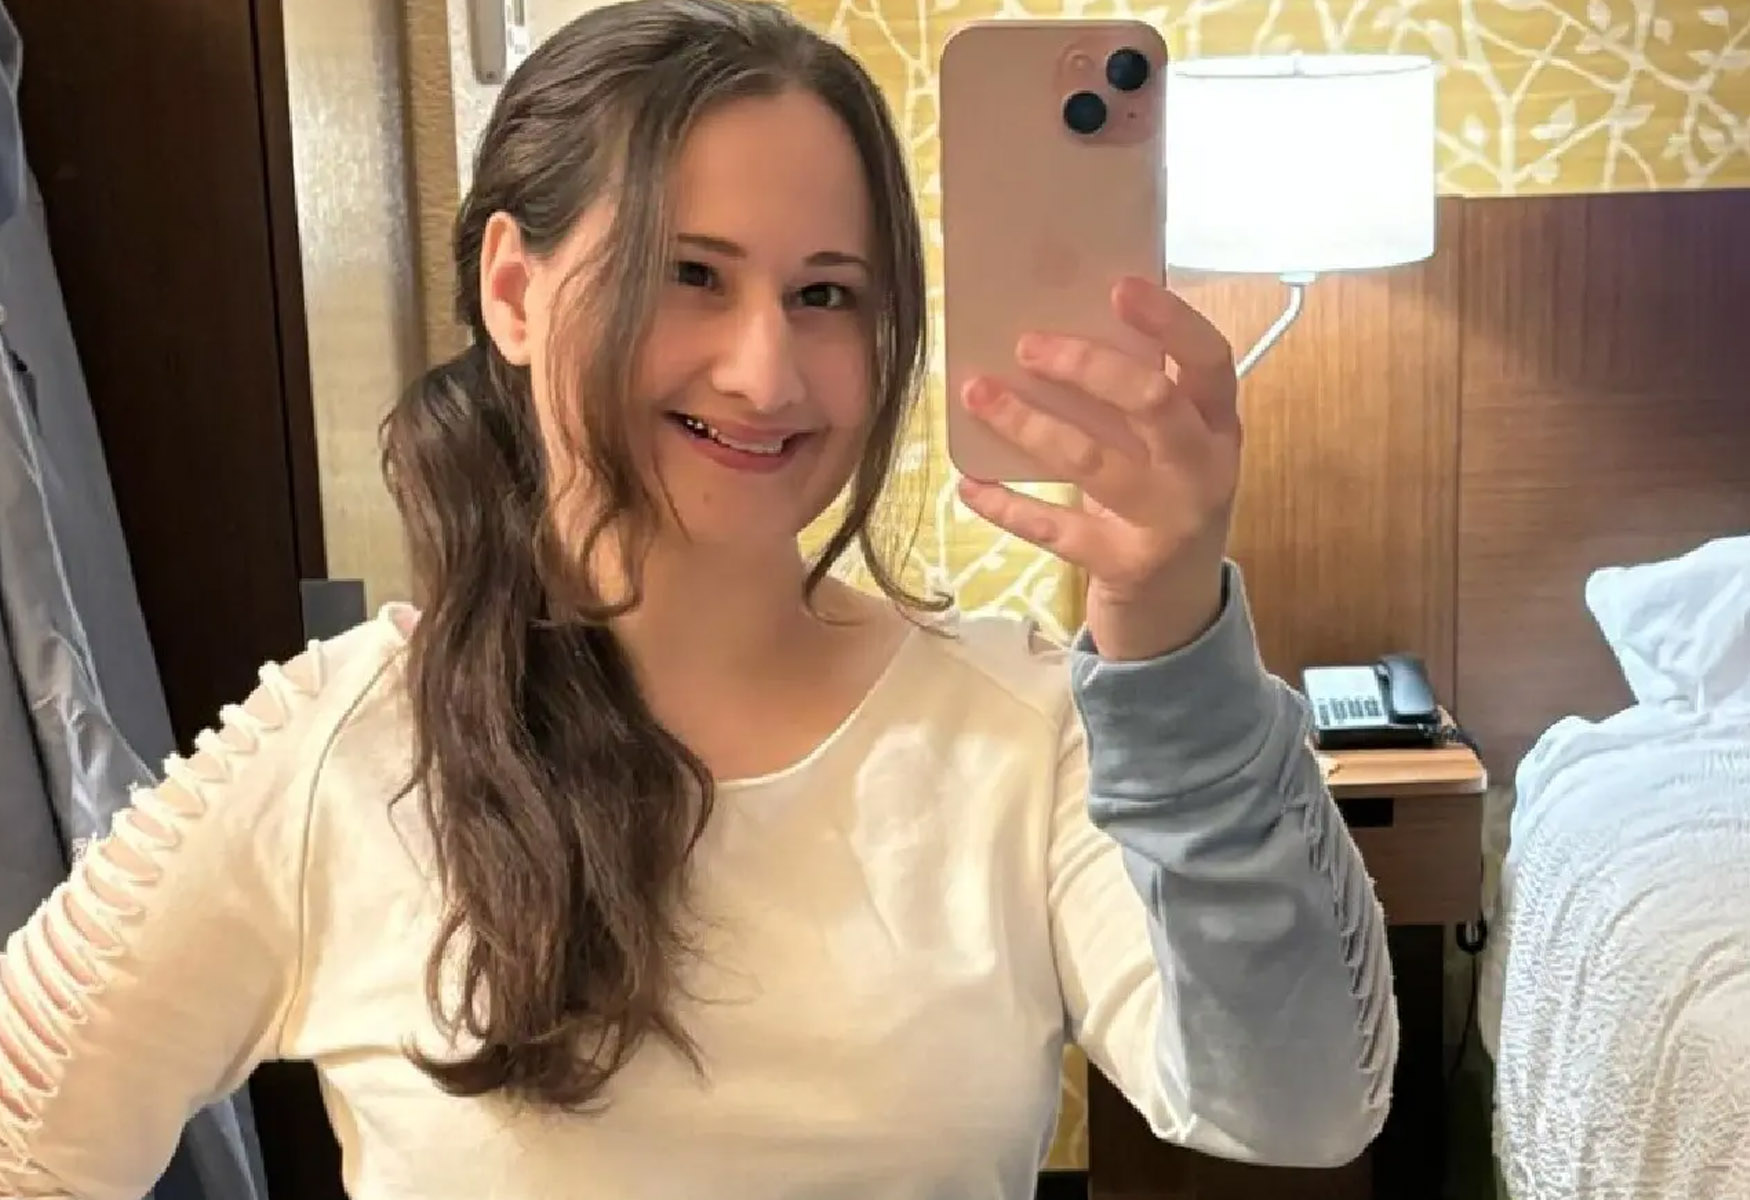 Gypsy Rose Blanchard Receives Free Smile Makeover Offer From Lamar Odom